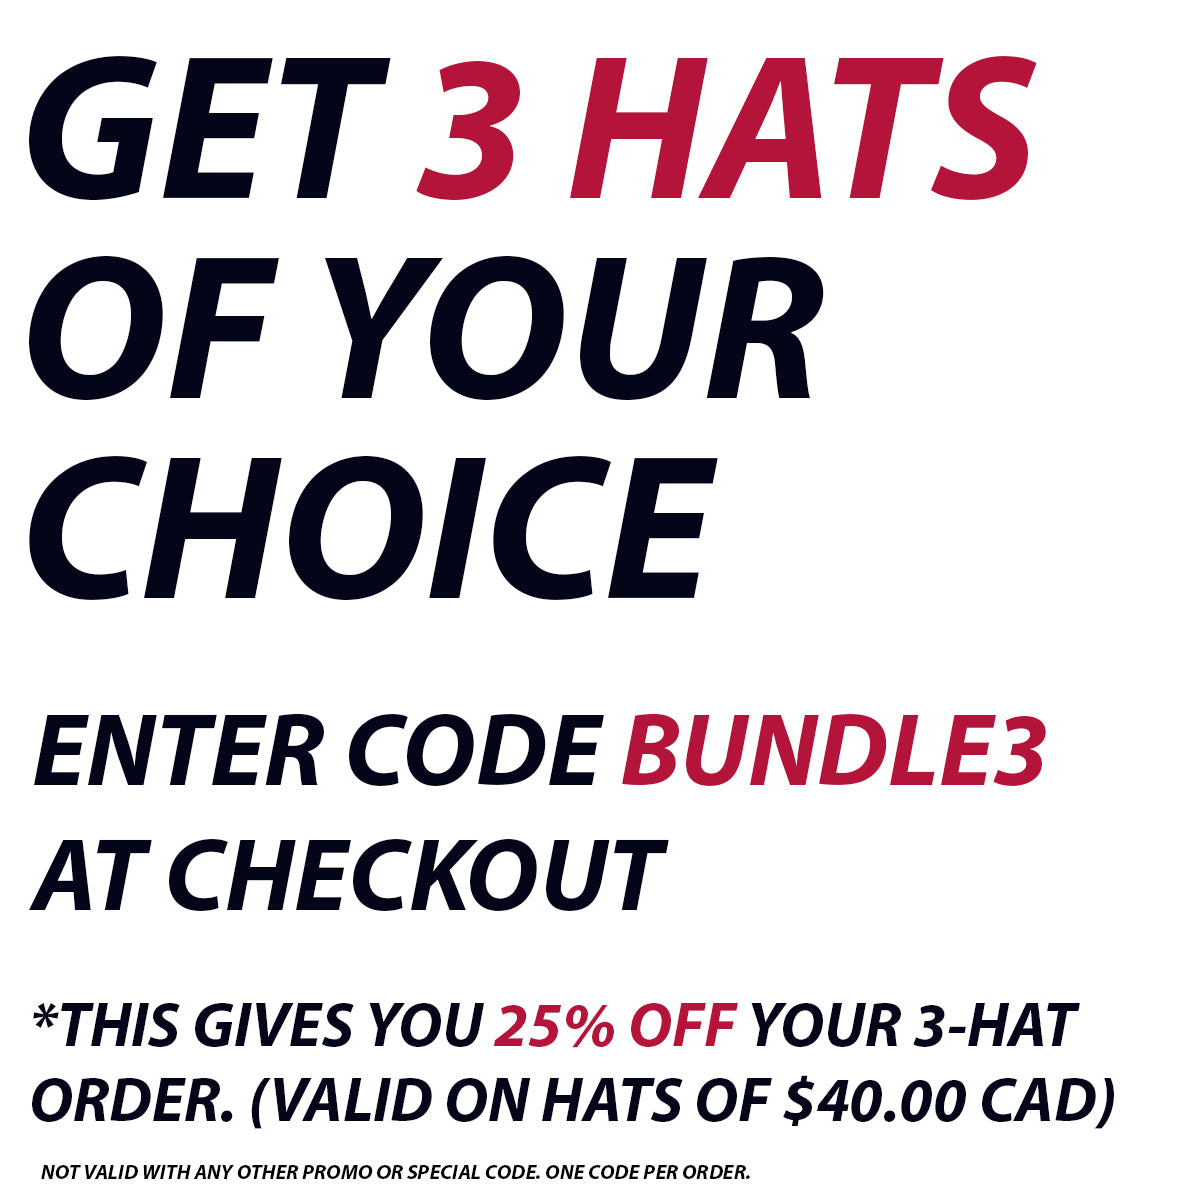 Get 3 hats of your choice and receive 25% off